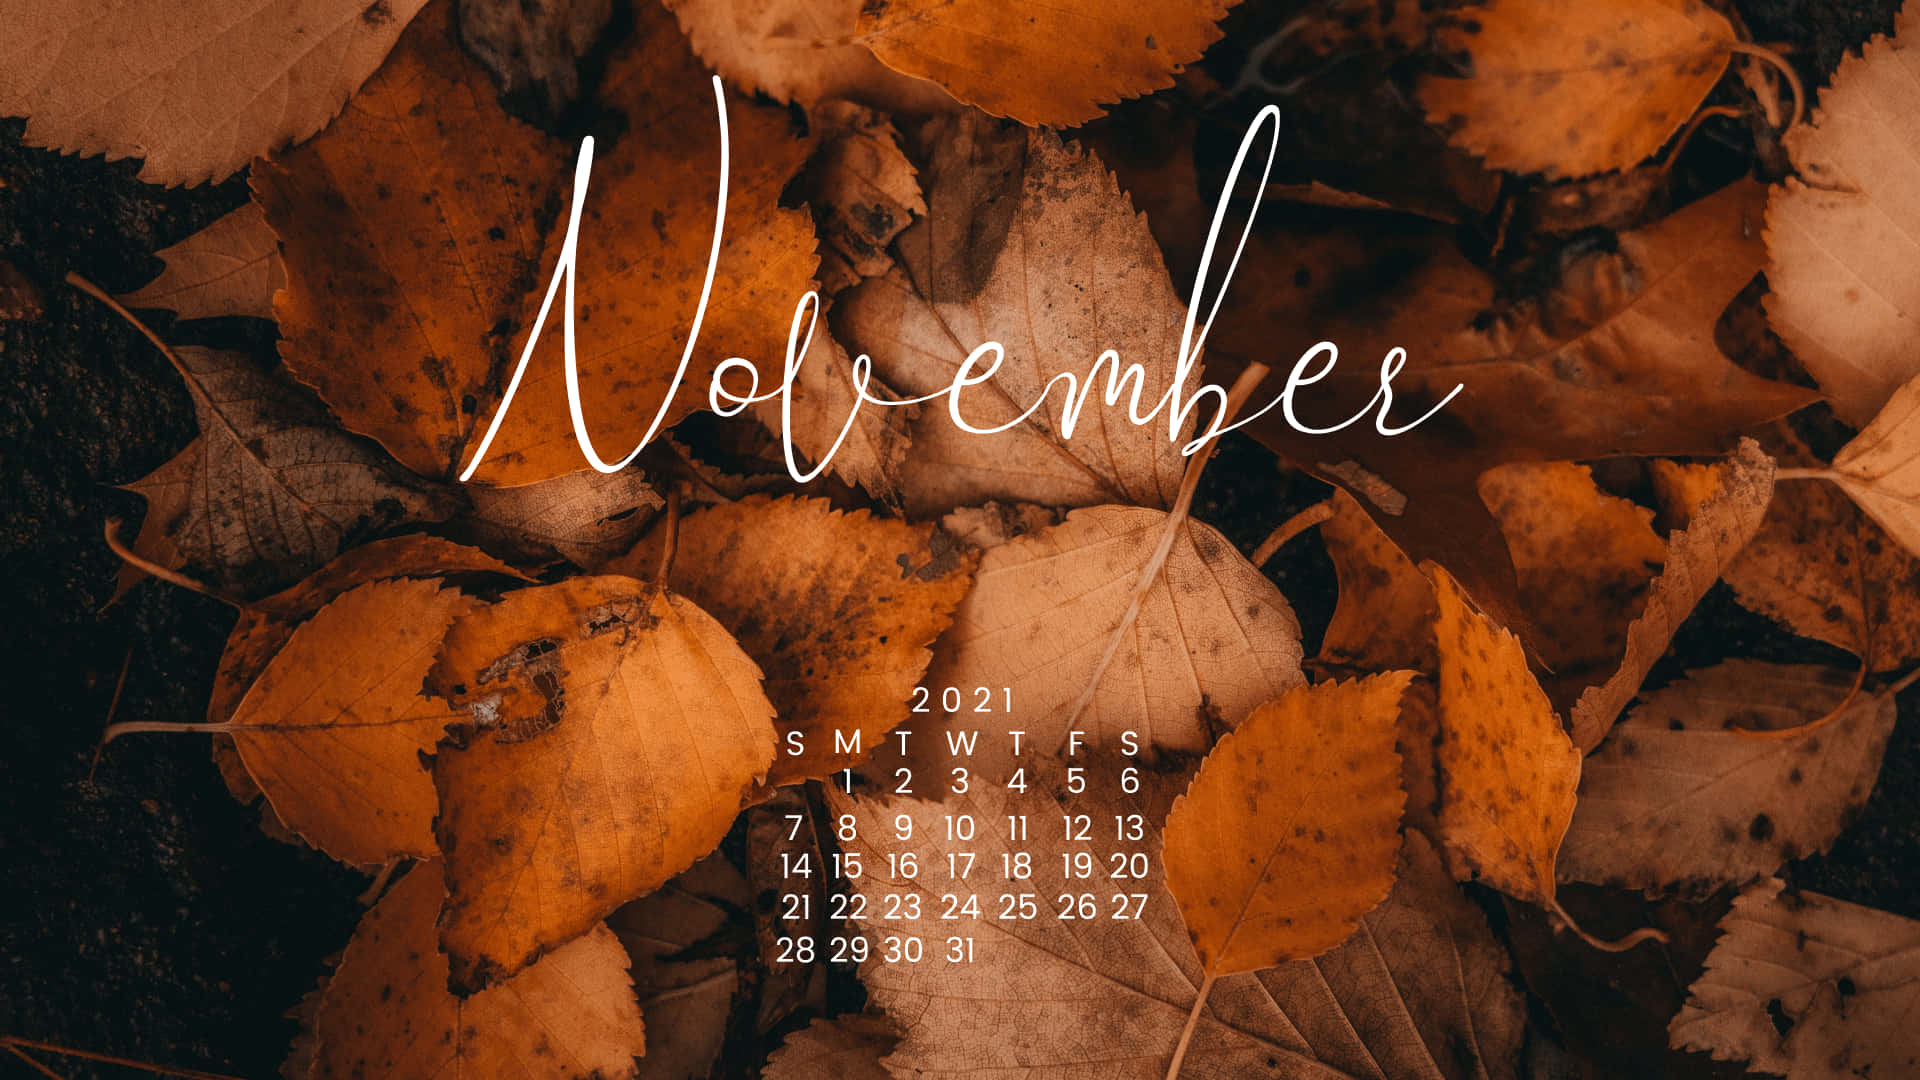 "Welcome to November - a month of joy, giving, and gratitude!"